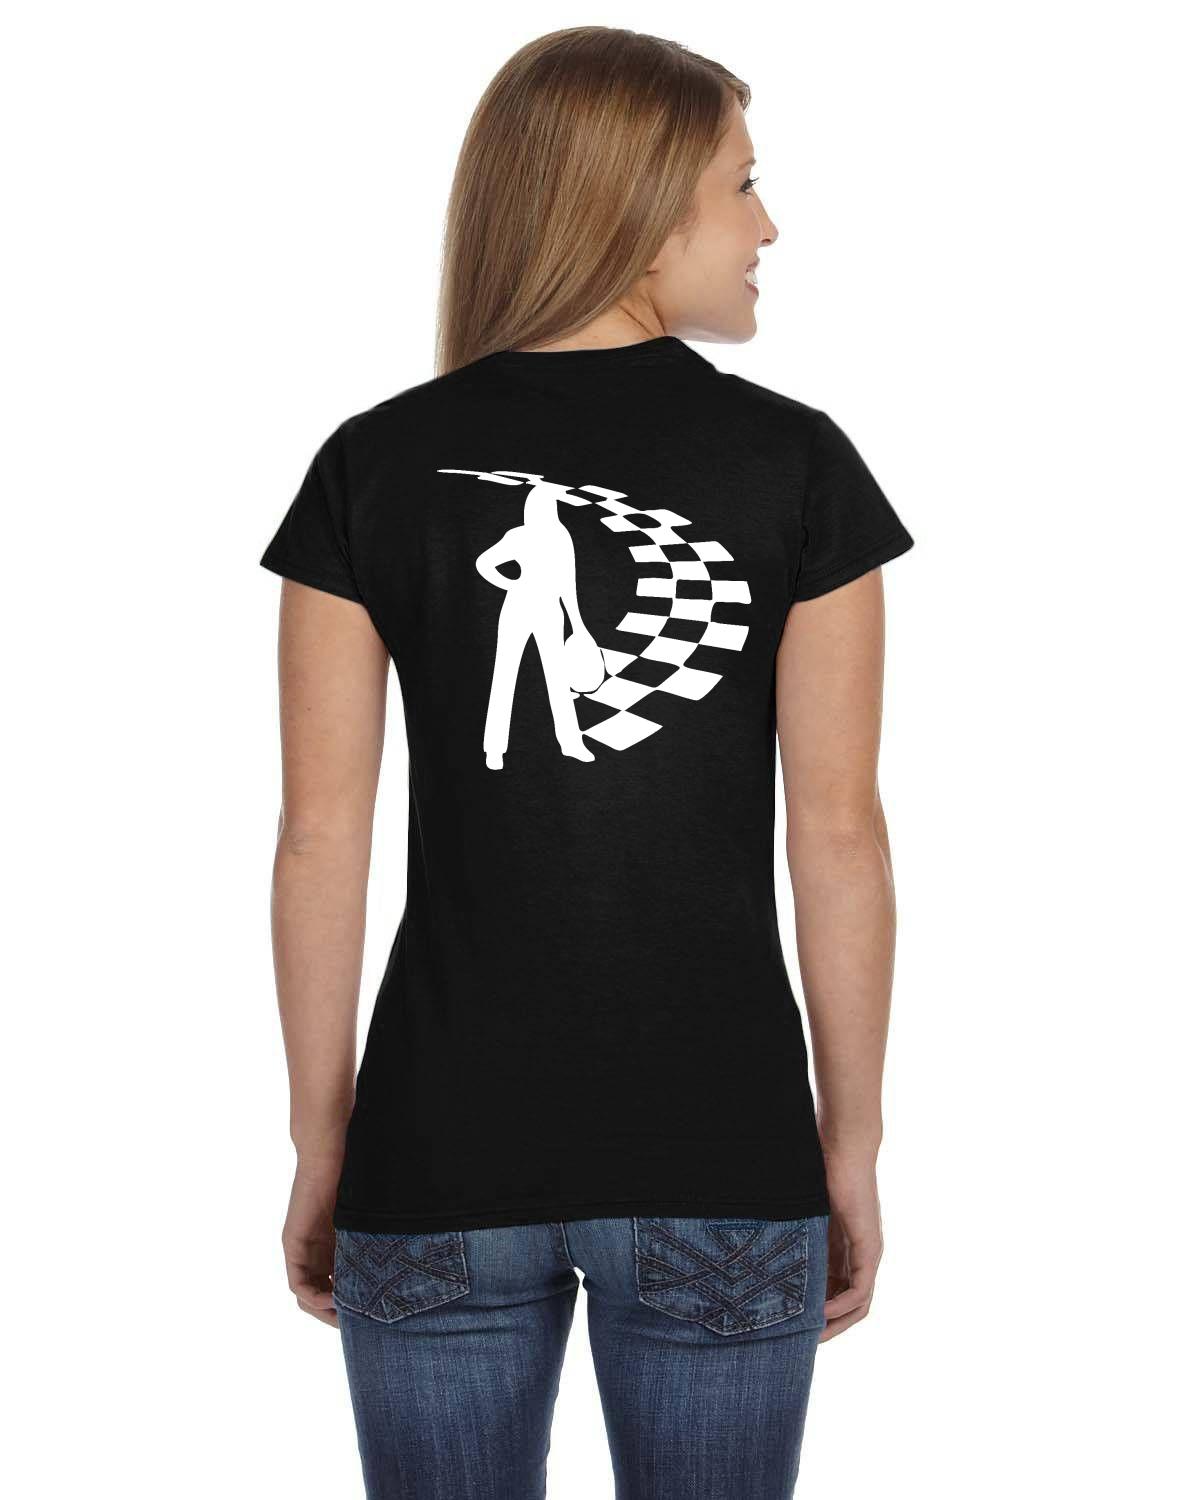 LOTO Ladies of the Oval Ladies' T-Shirt